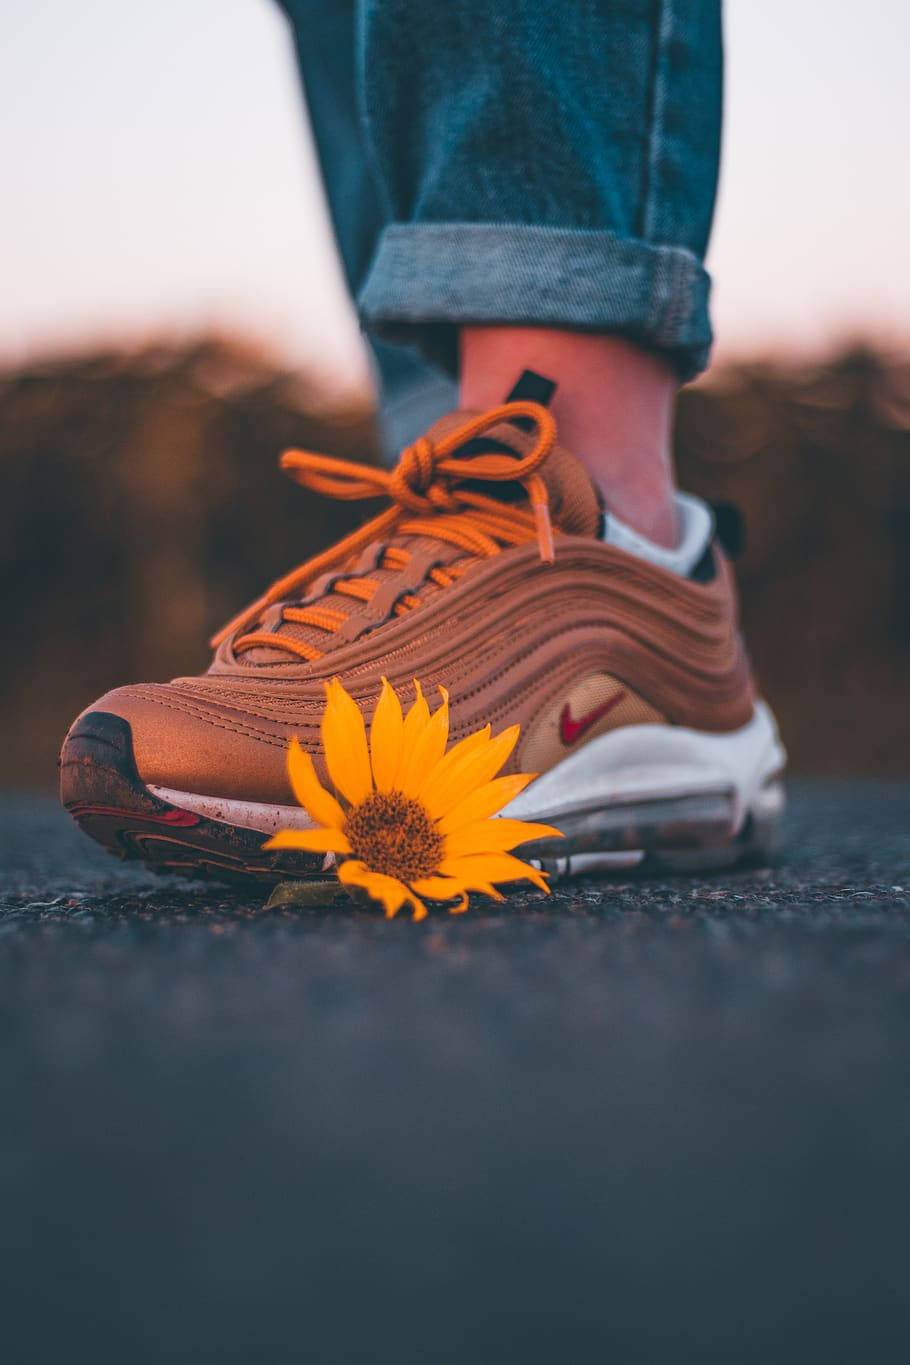 Nike Shoes And Sunflower Wallpaper